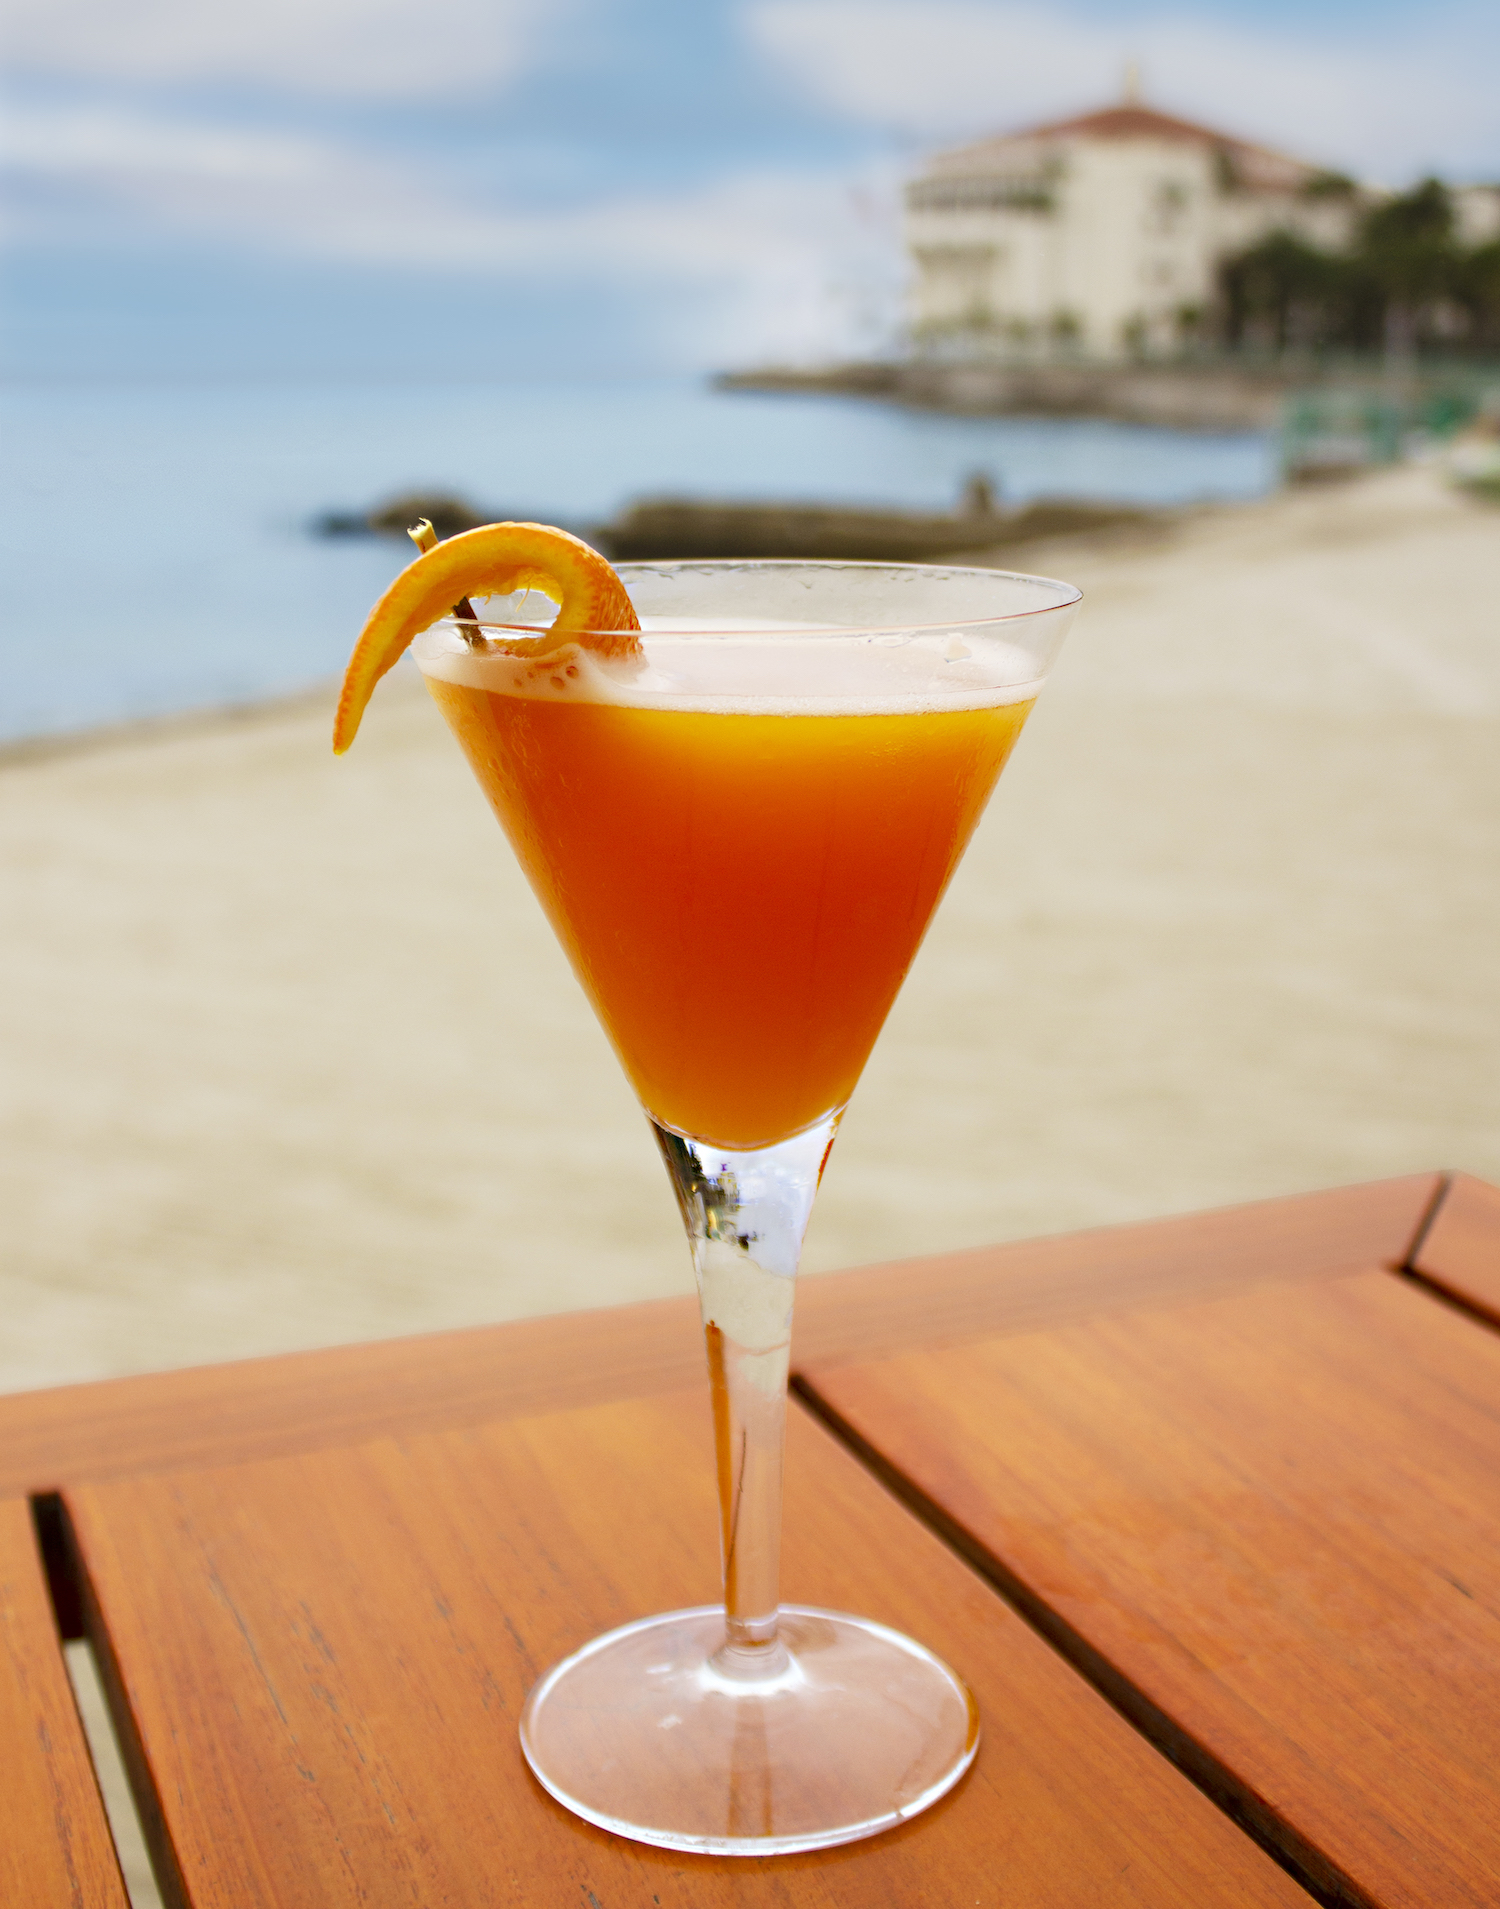 The Catalina Unquarantini, a fresh delightful concoction containing vodka, Aperol and fresh citrus juices that is sure to put you in a vacation mood.